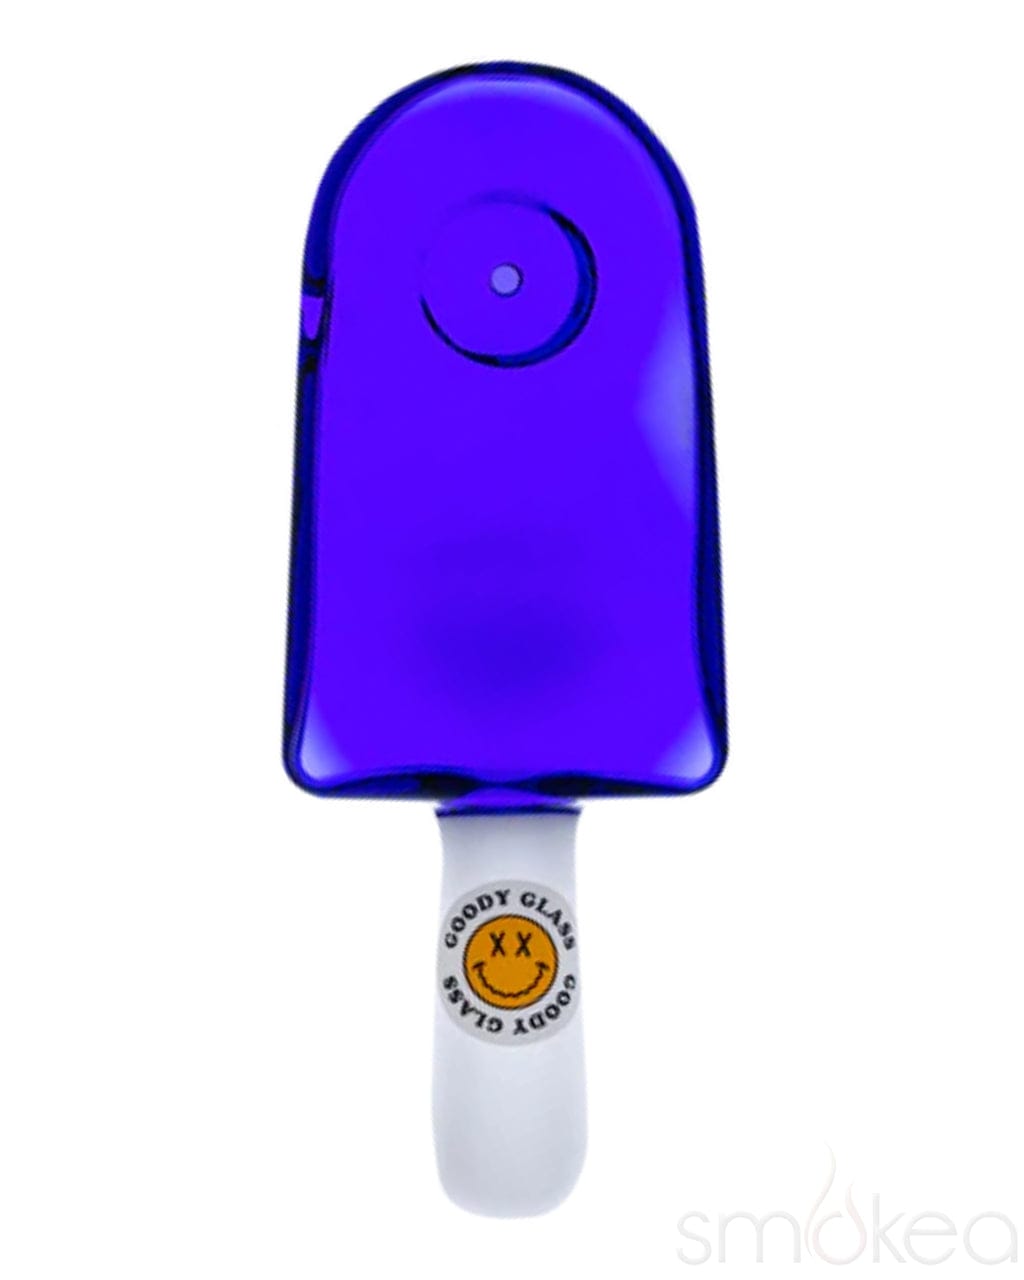 Blue Unique Glass Pipes for Smoking Crystal - Reliable Glass Bottles, Jars,  Containers Manufacturer